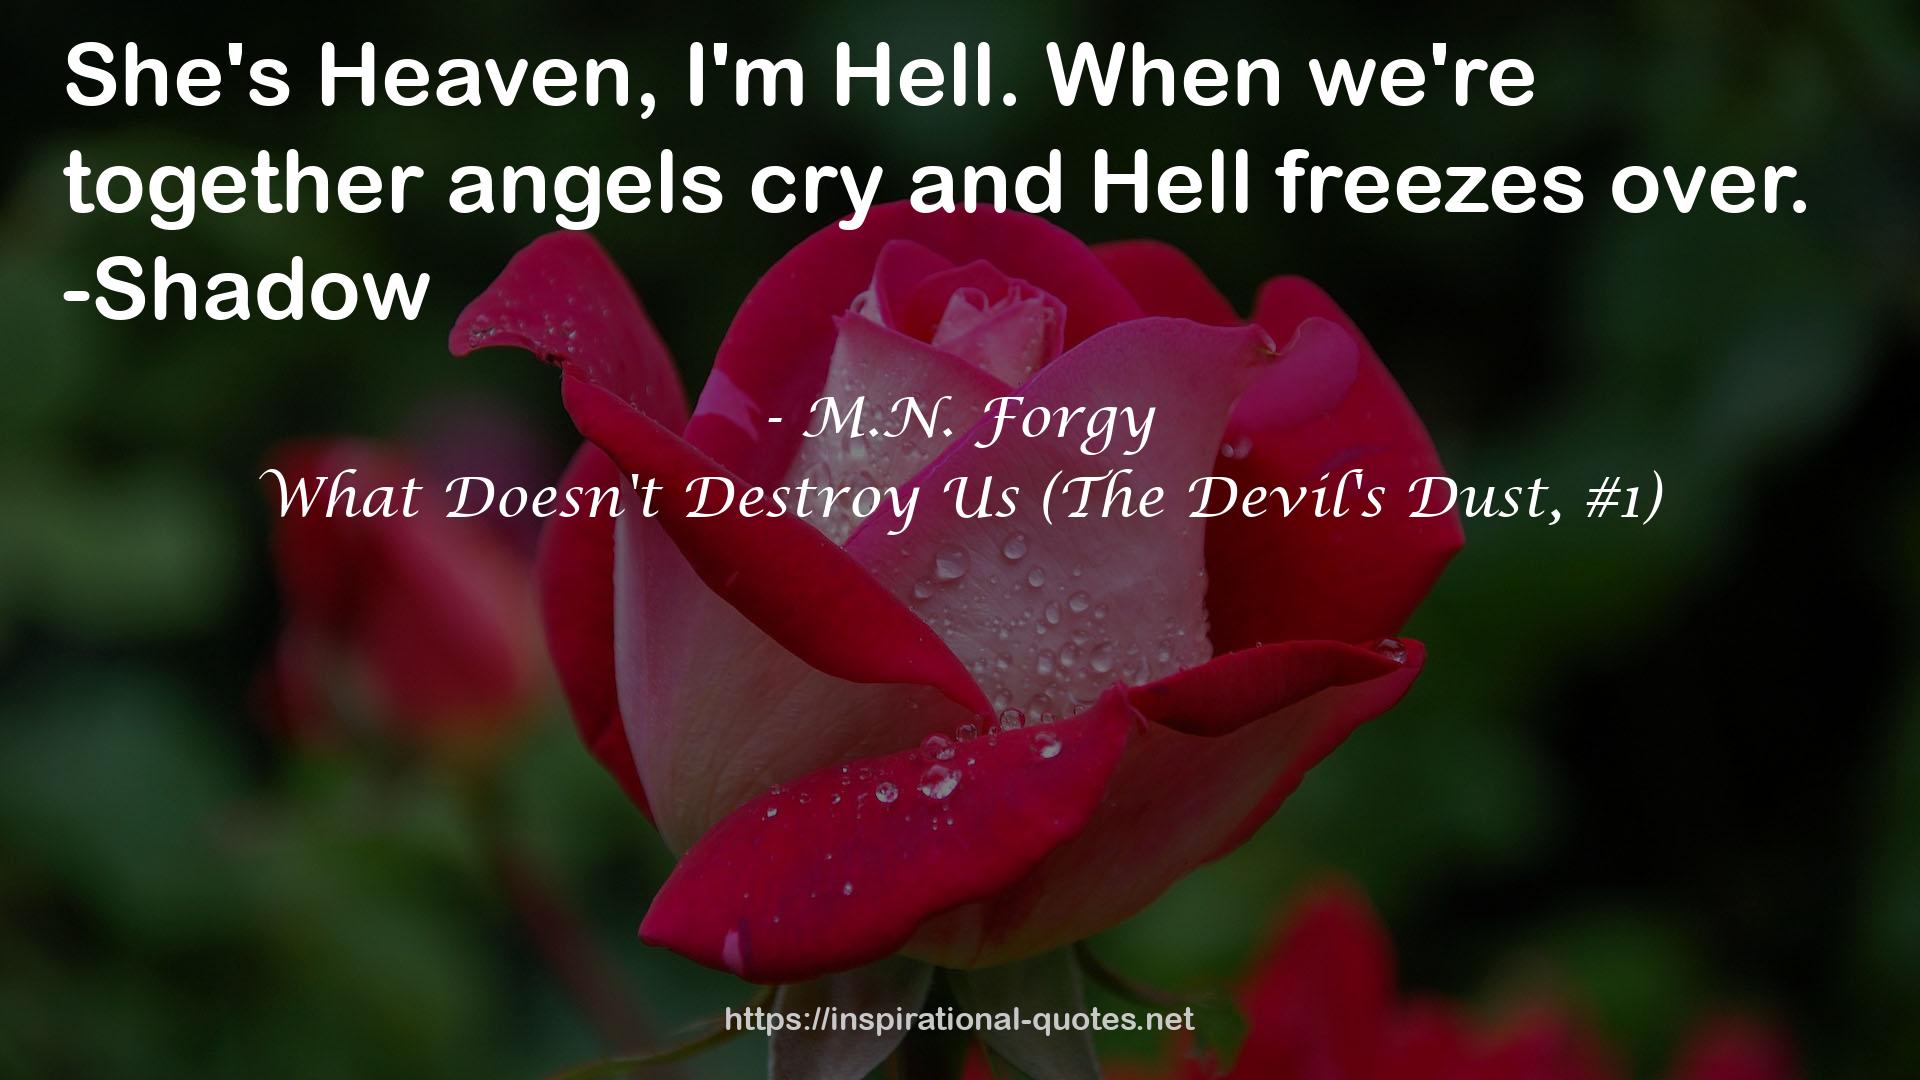 What Doesn't Destroy Us (The Devil's Dust, #1) QUOTES